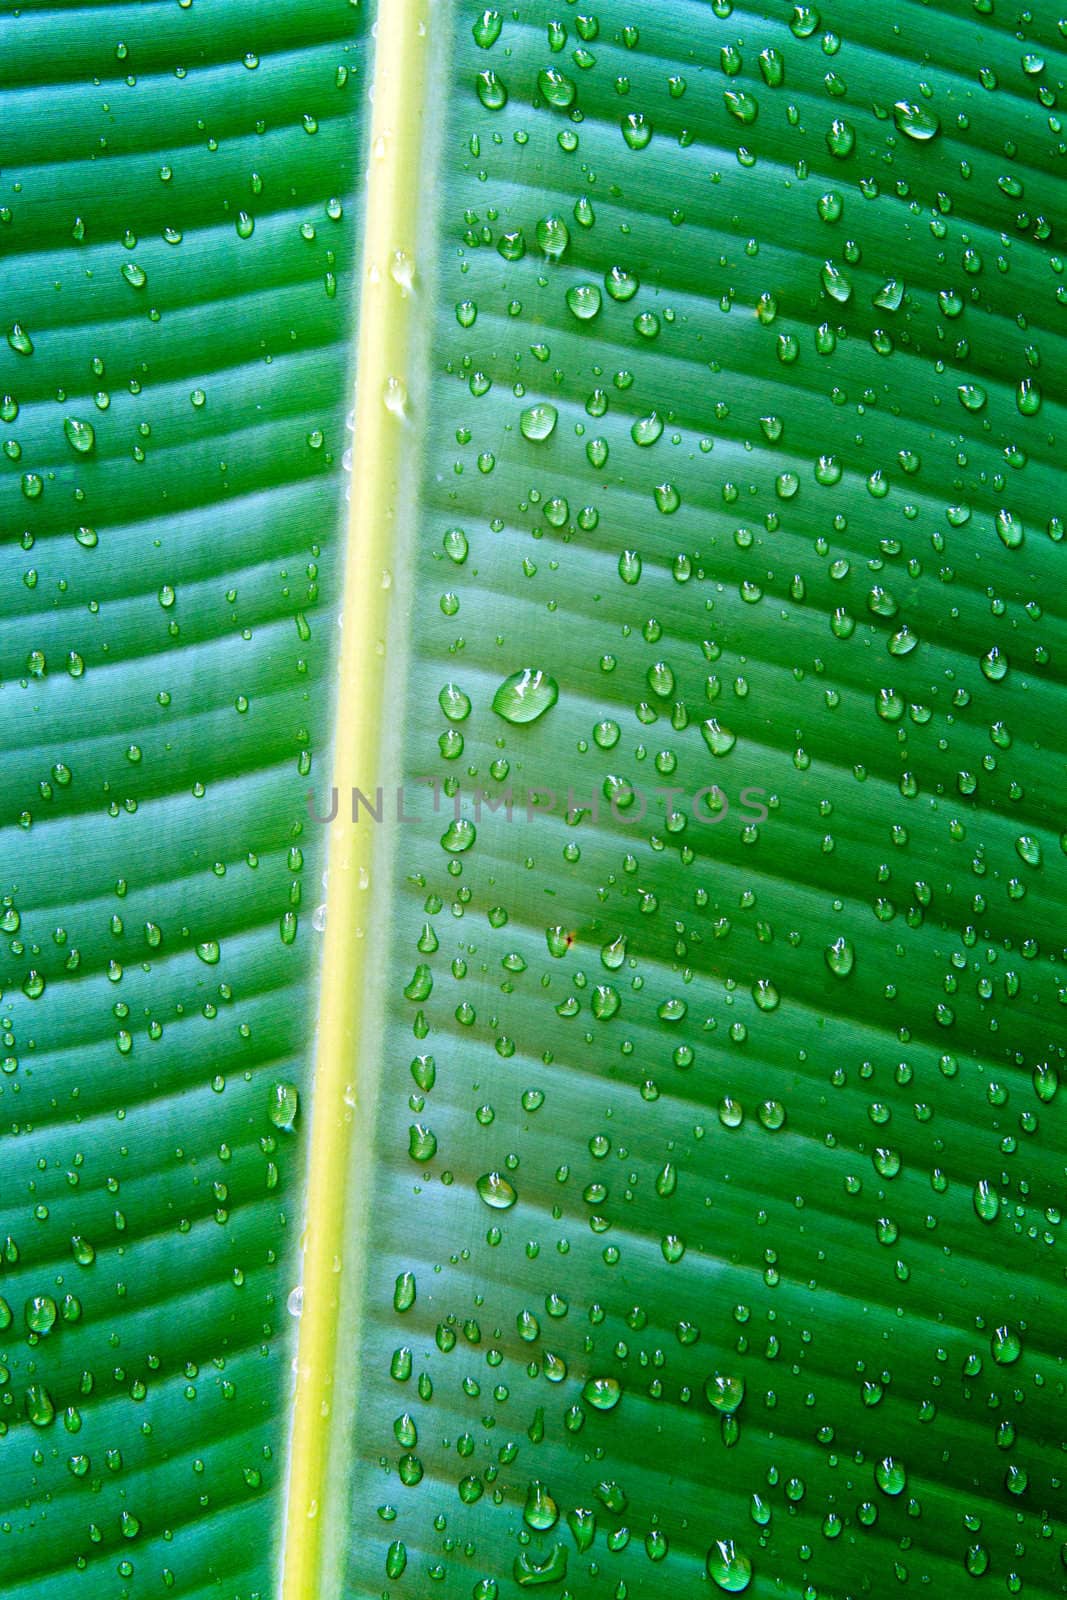 Detail of banana leaf close up for texture